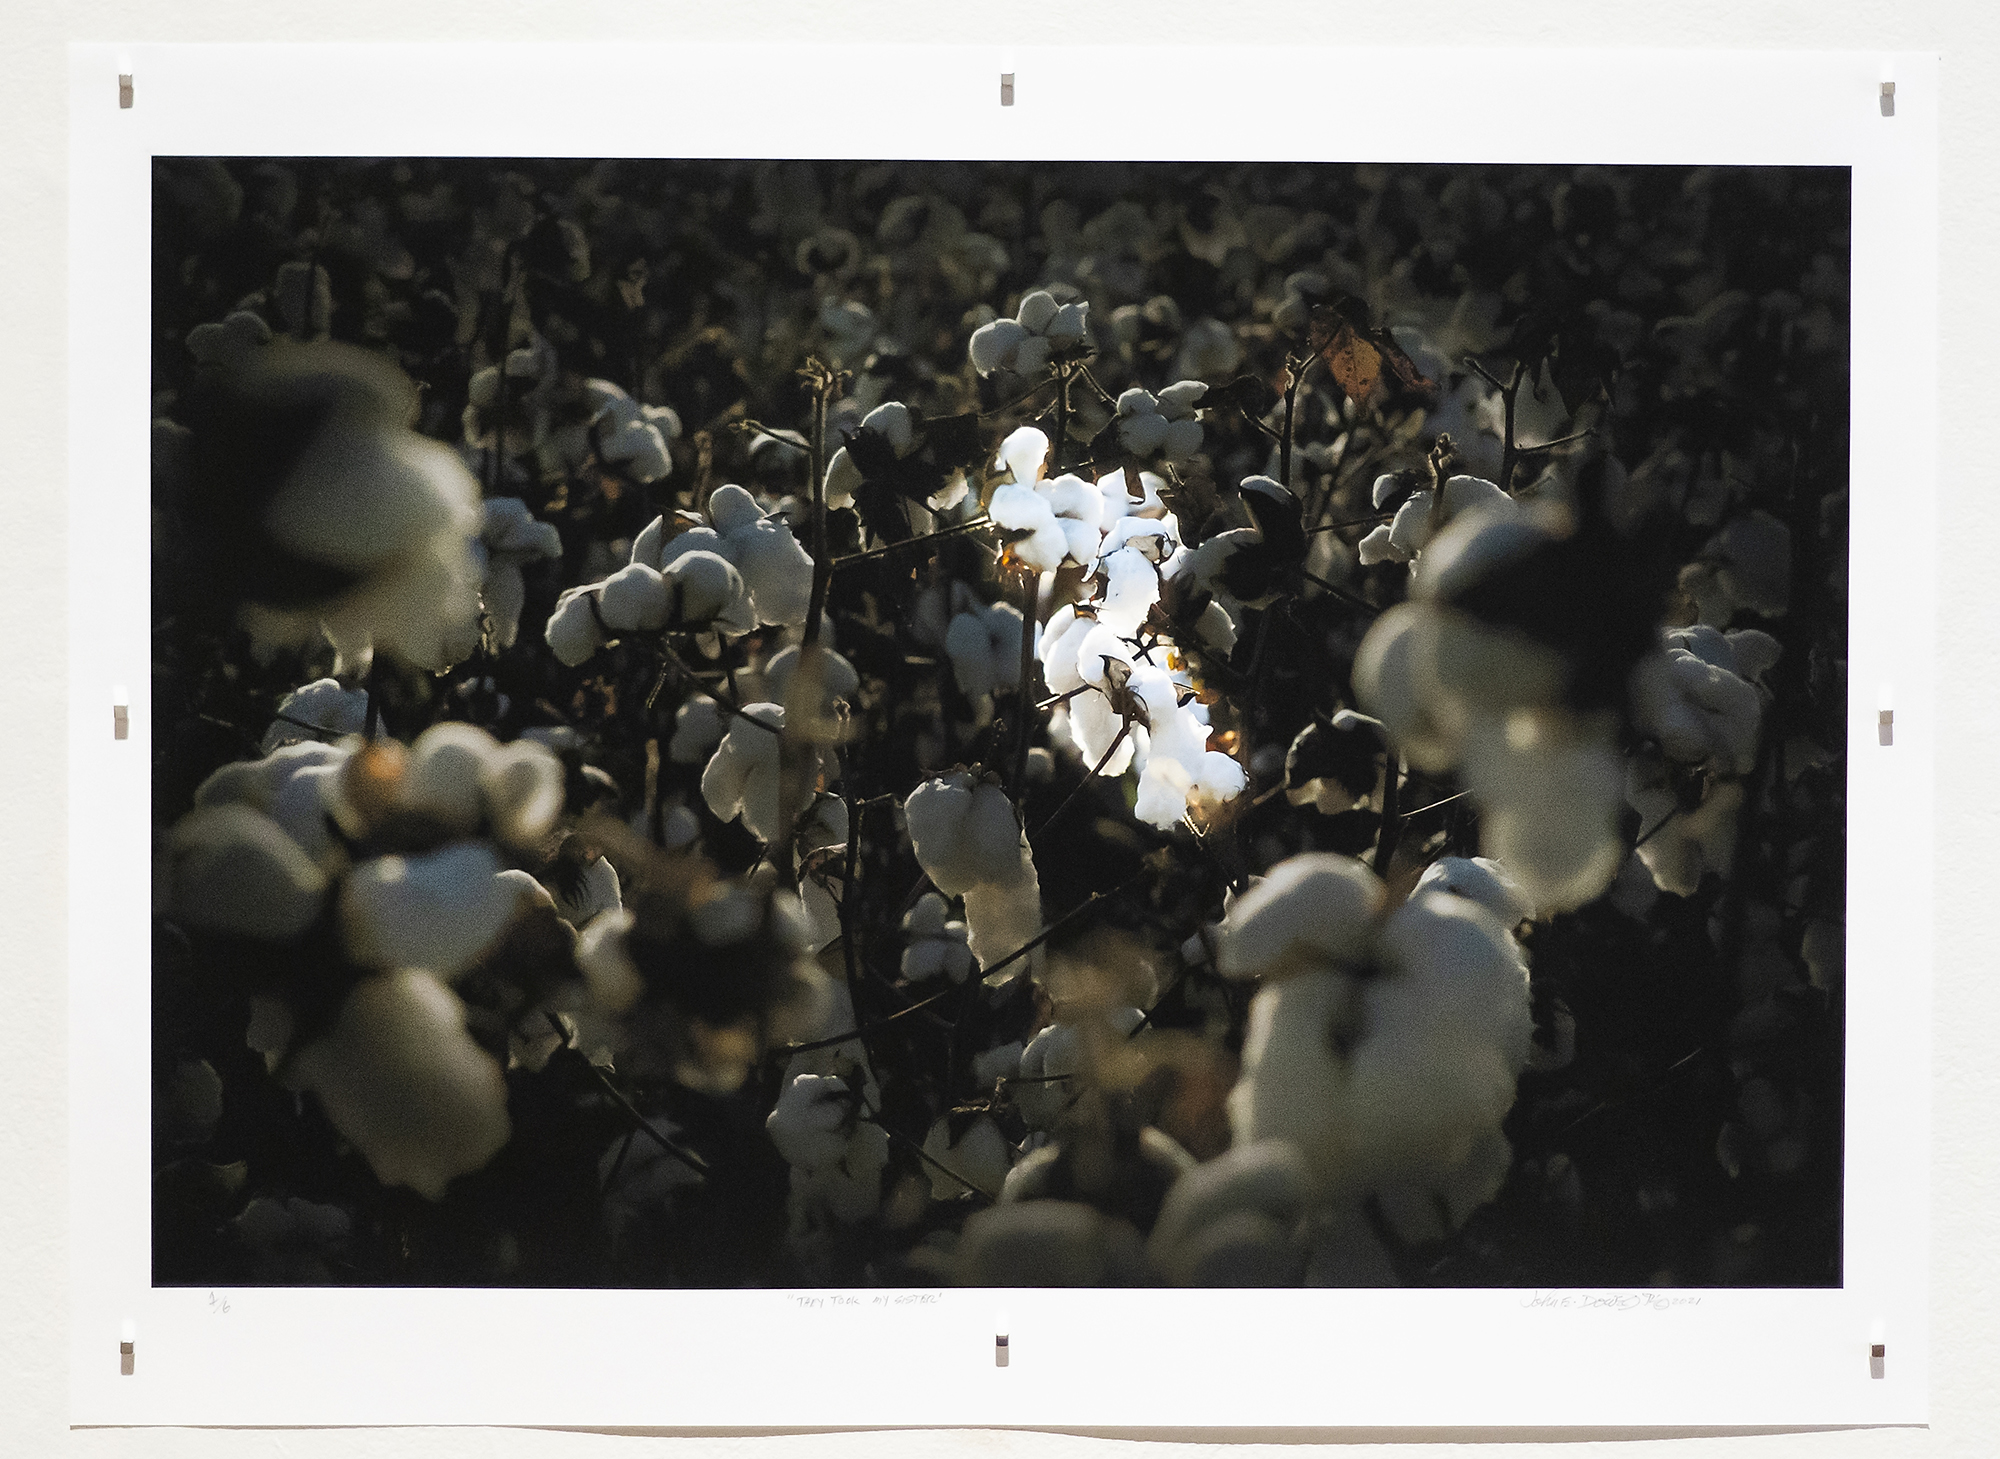 artwork showing cotton in the field at night with one blossom illuminated